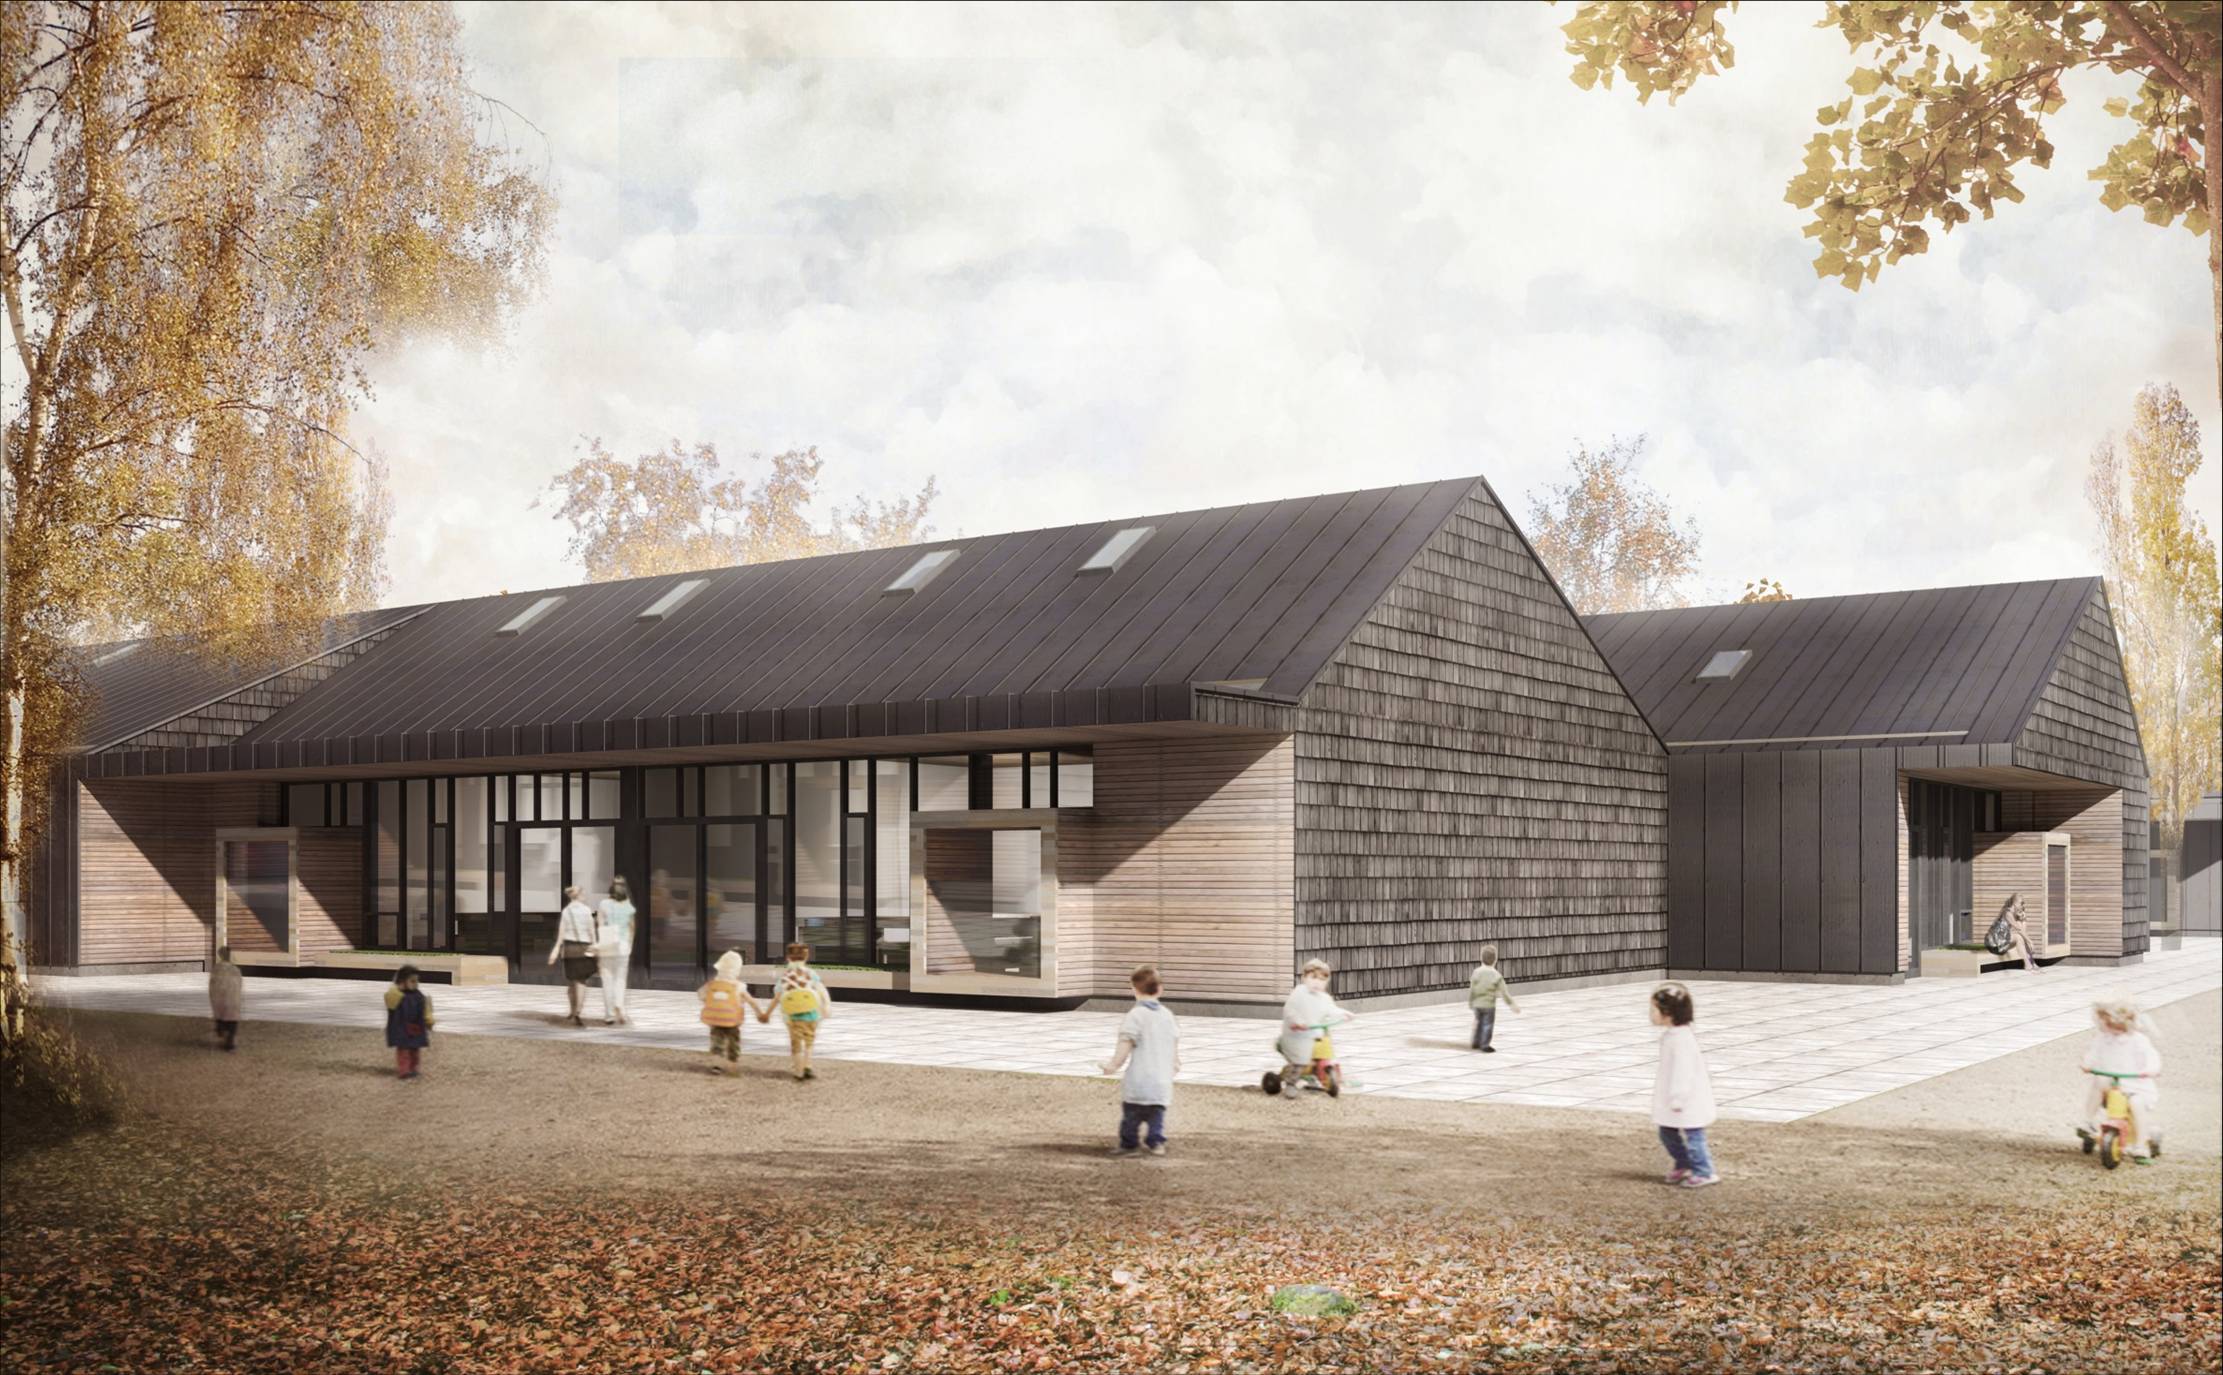 An artist's impression of how the new school could look